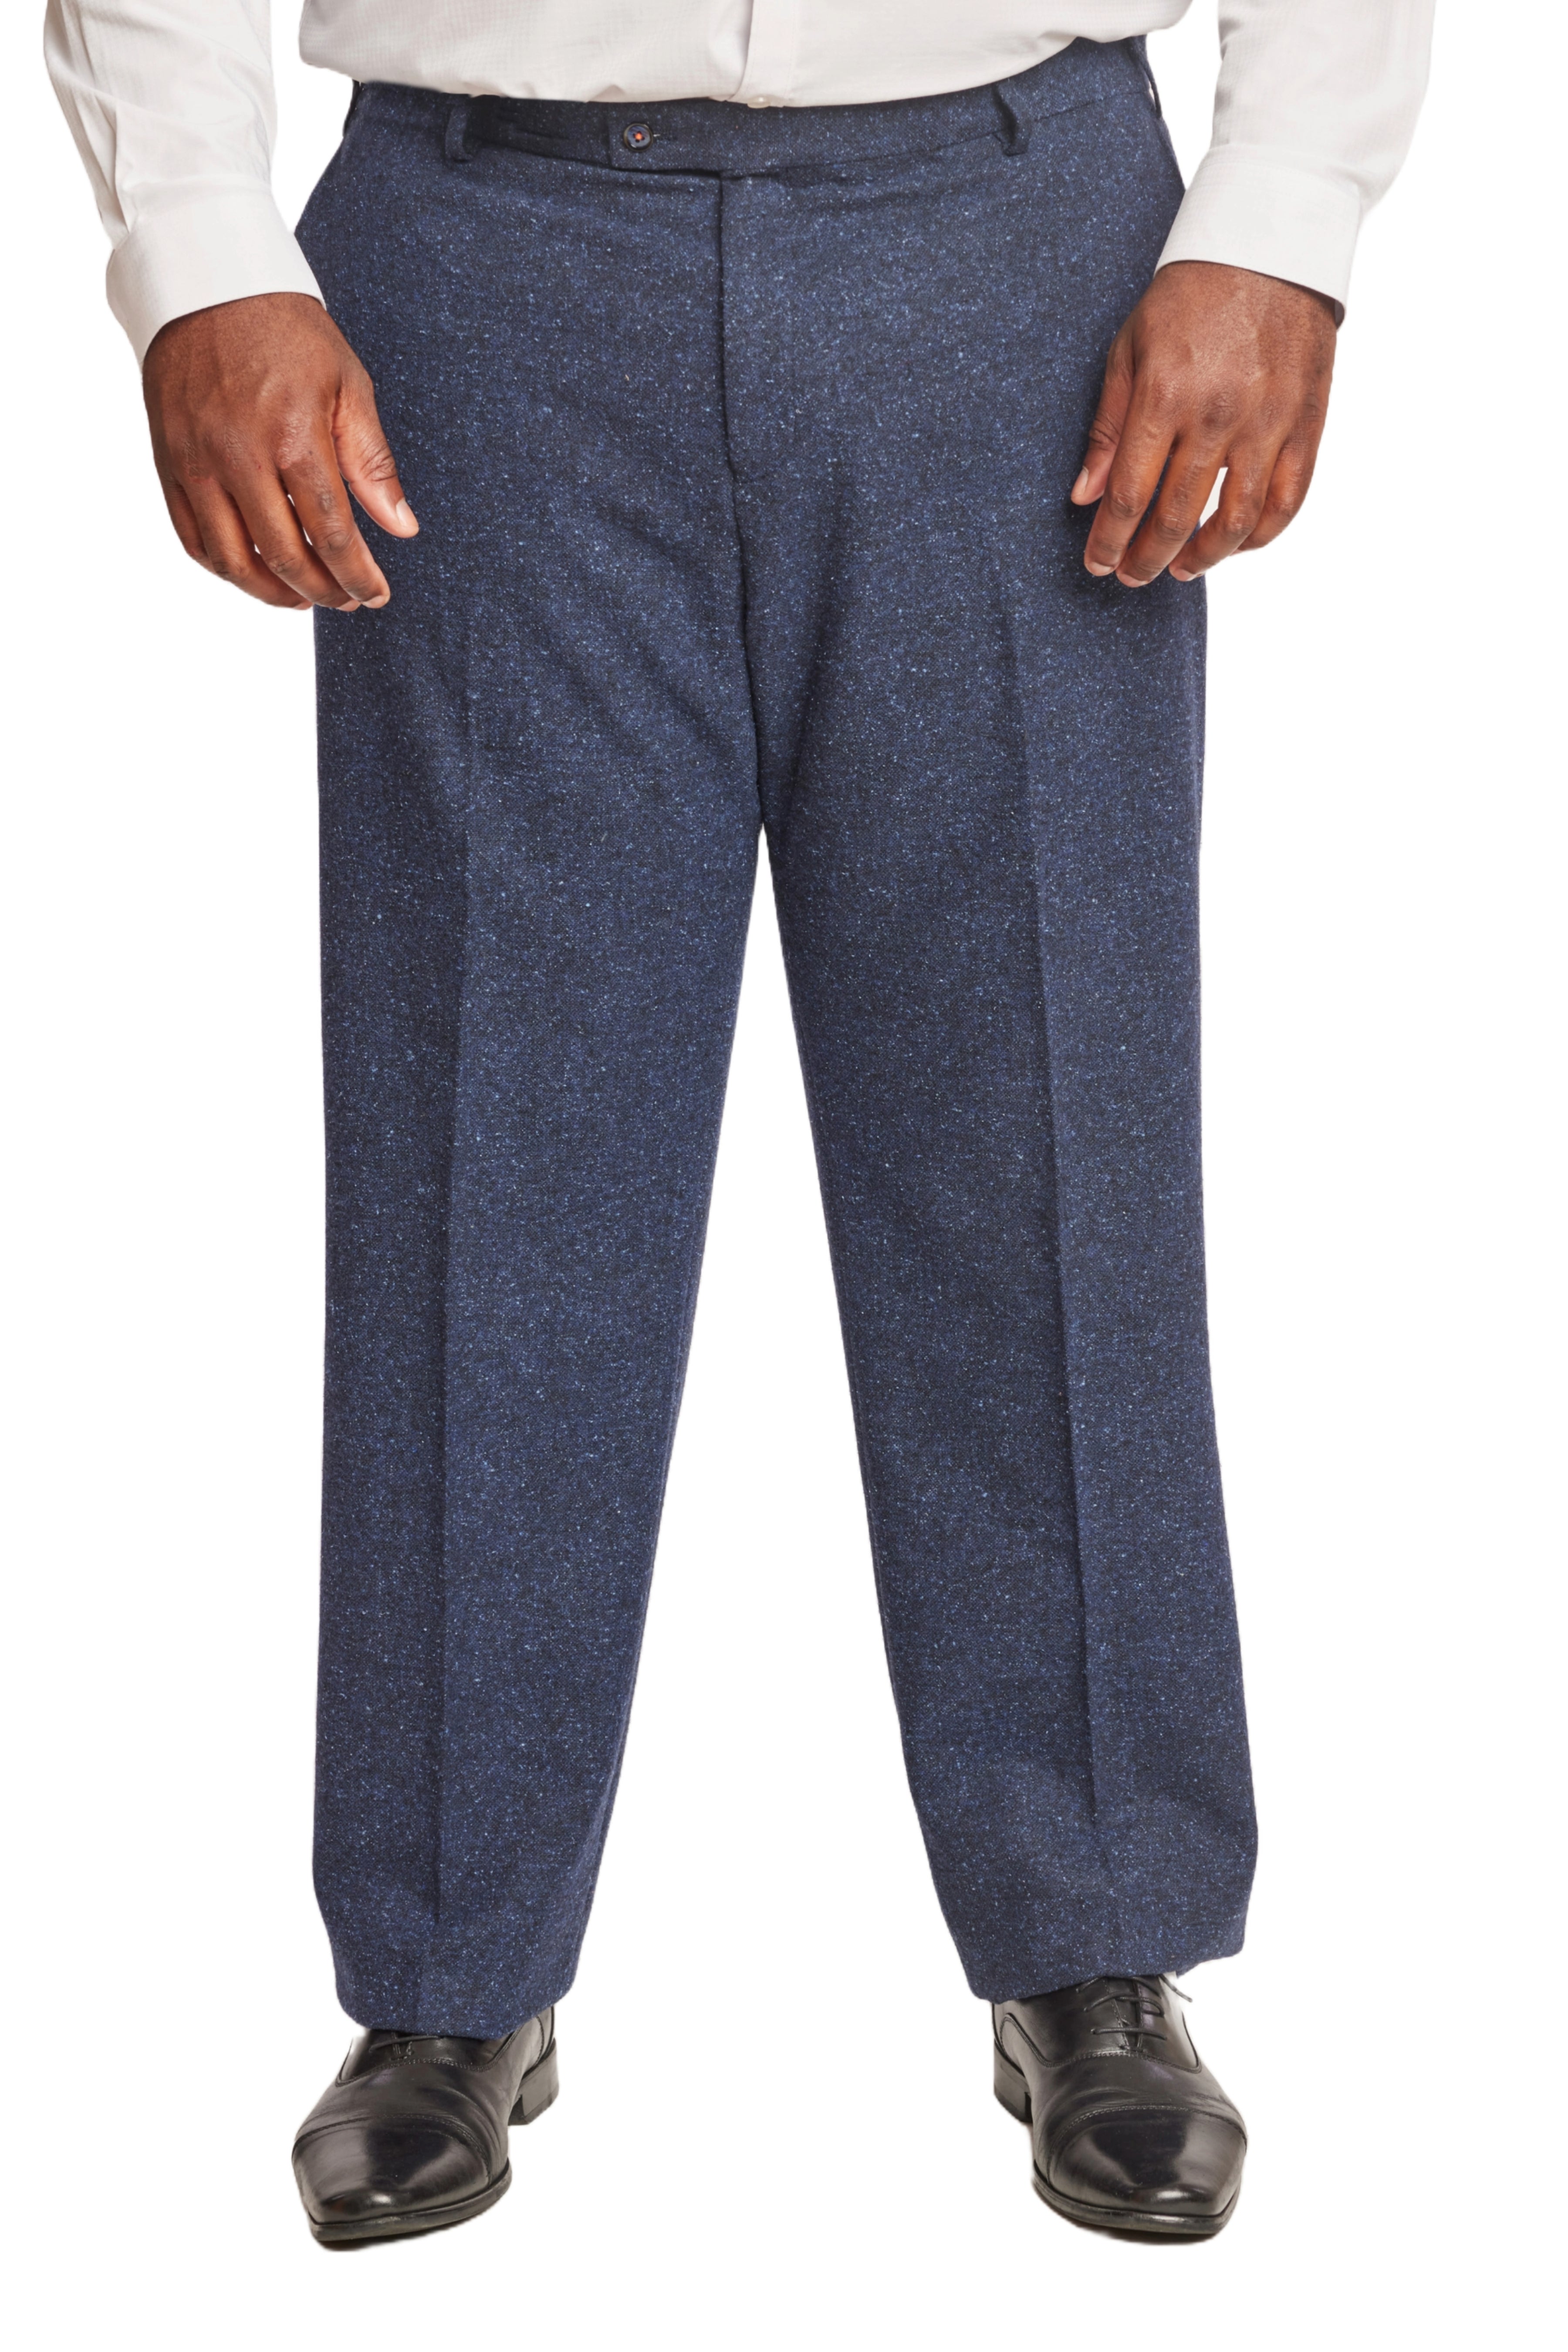 Big & Tall Downing Pants - Blue Speckle